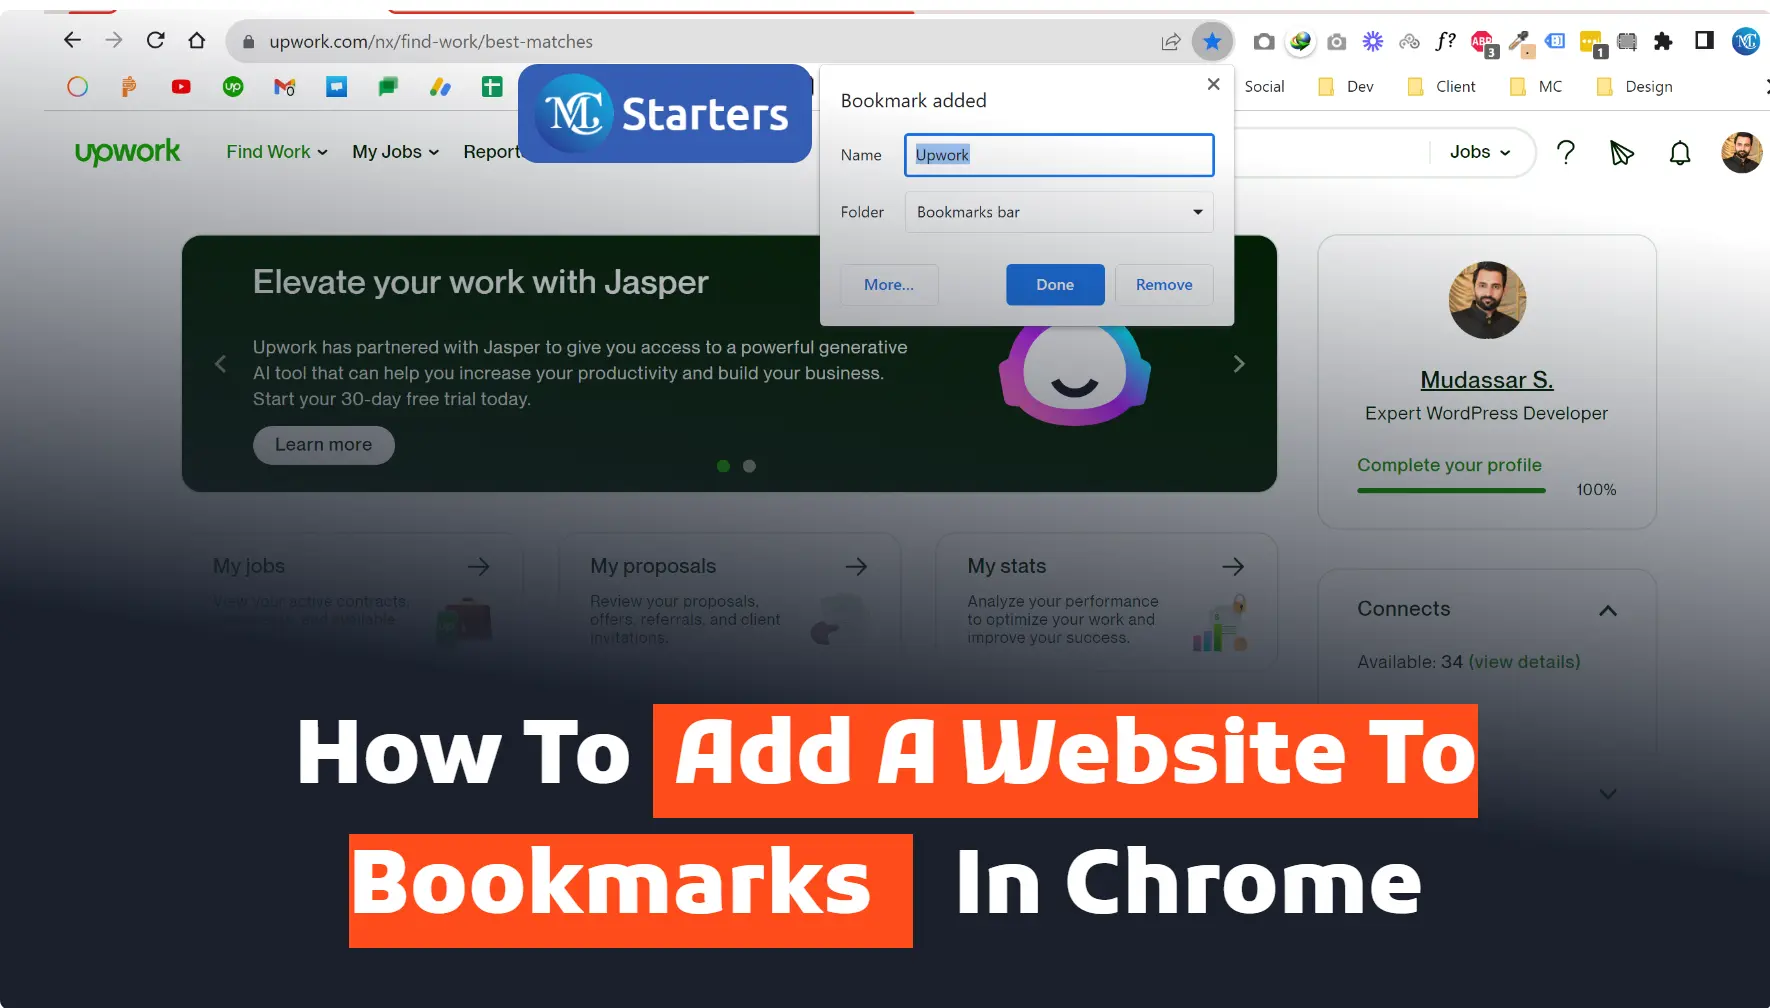 How to Add a Website to Bookmarks in Chrome: Step-by-Step Guide